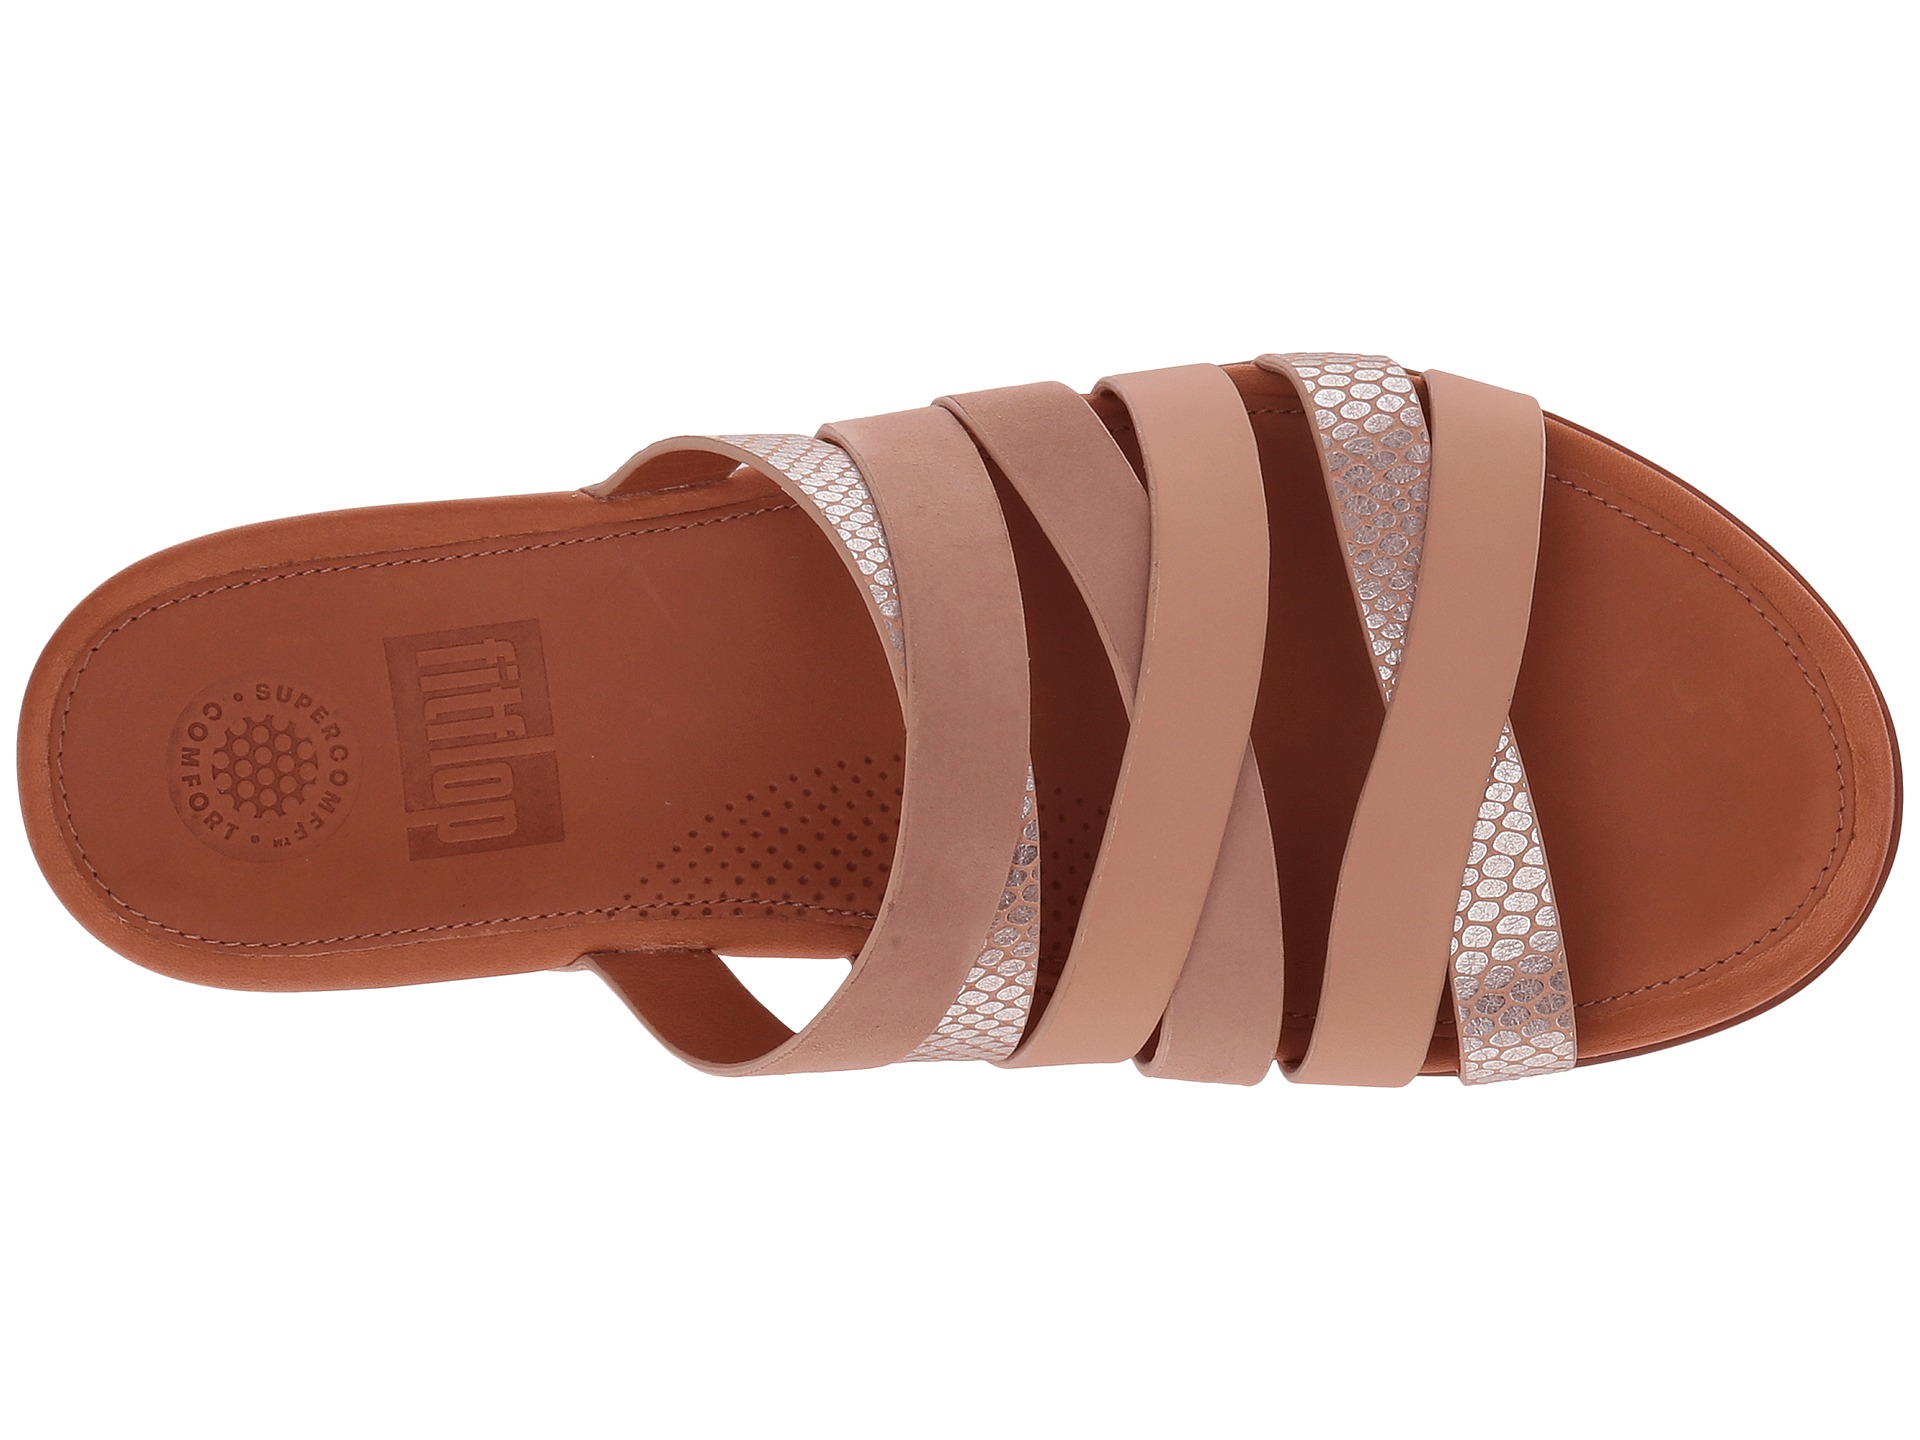 FitFlop Lumy Leather Slide at Zappos.com